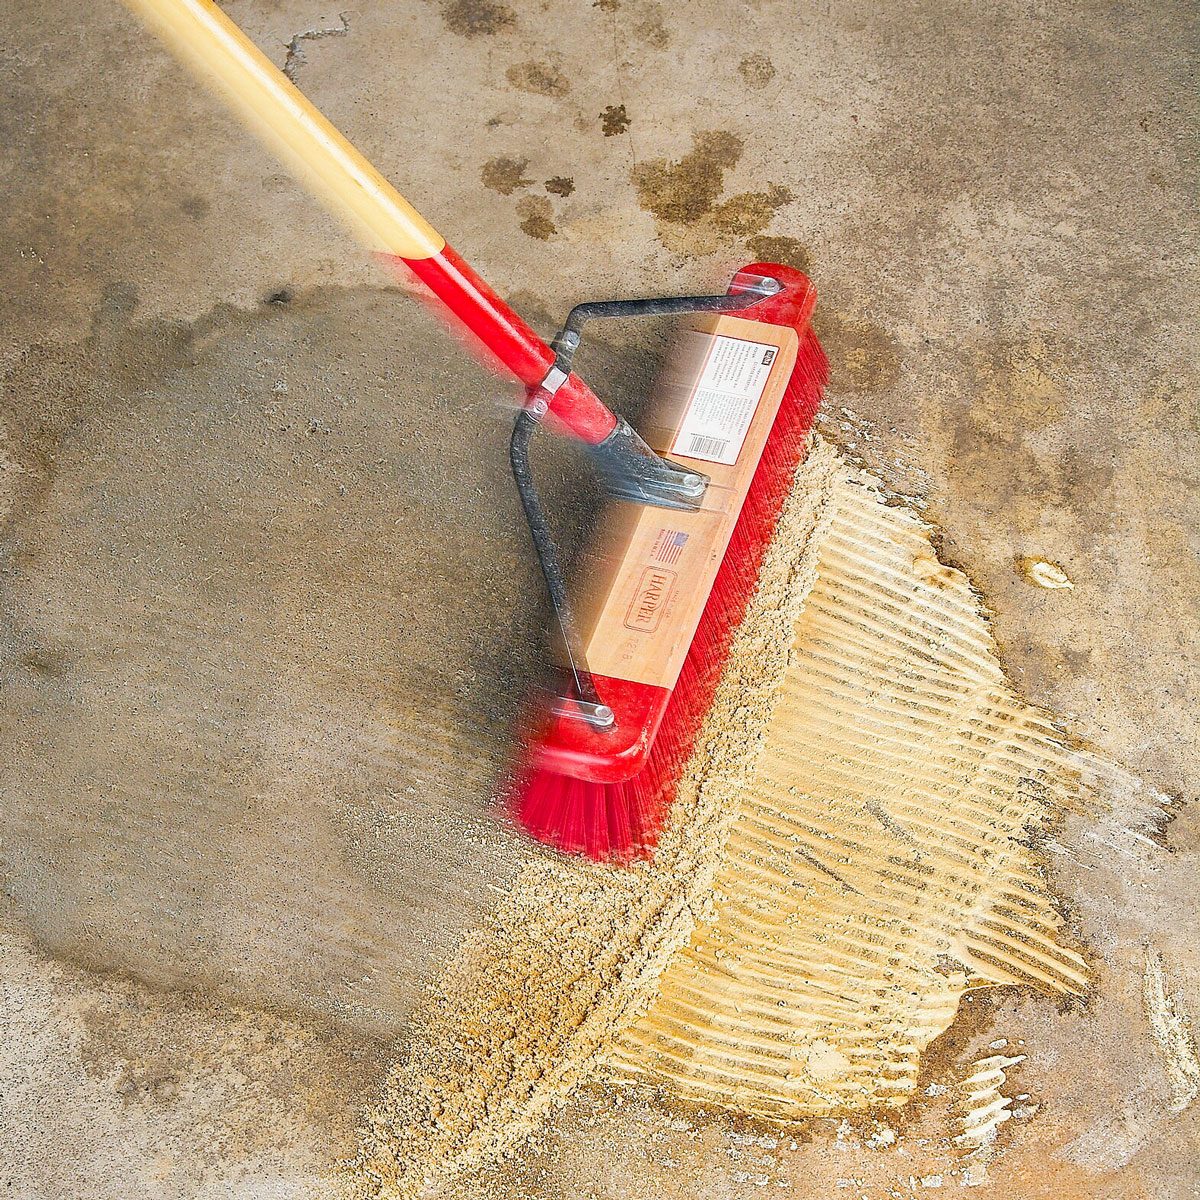 https://www.familyhandyman.com/wp-content/uploads/2019/03/How-To-Remove-Oil-Stains-From-Concrete-Floors-FH08SEP_491_06_040_KSedit.jpg?fit=640%2C640